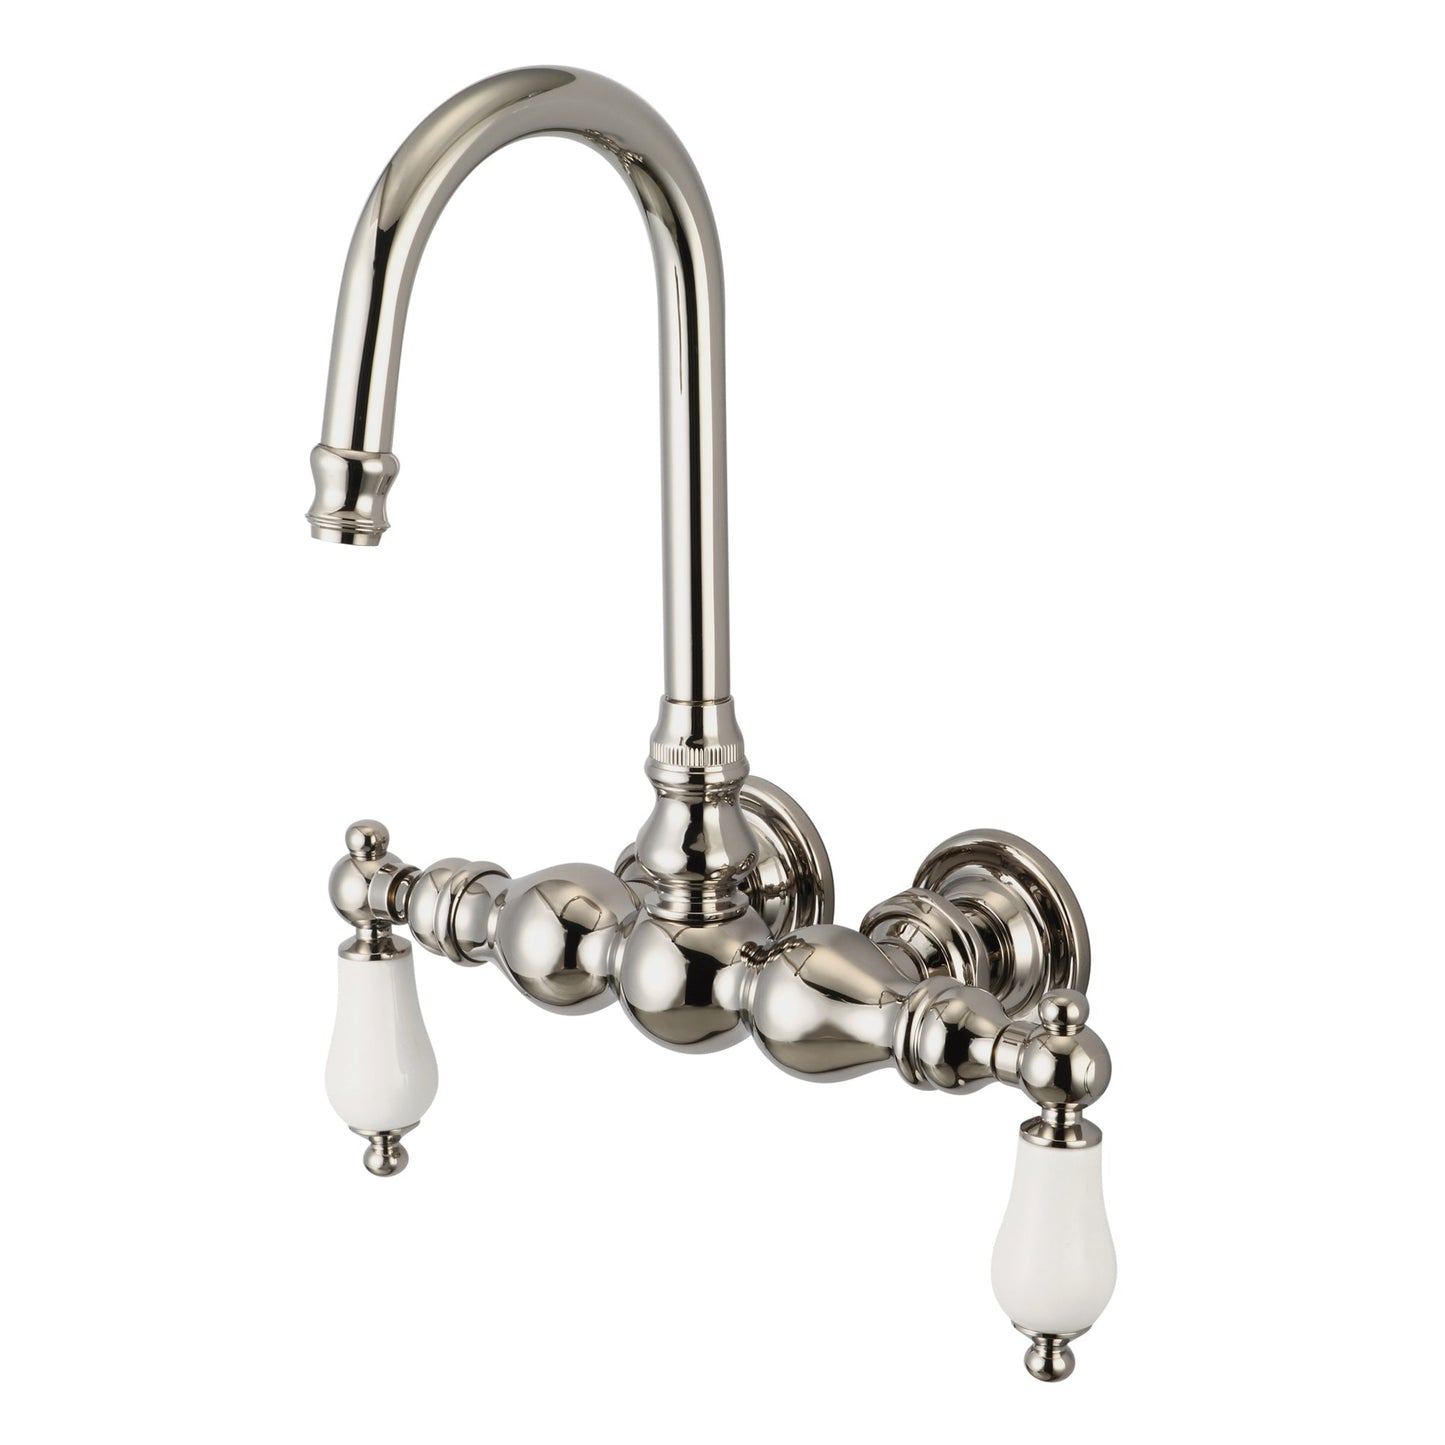 Water Creation Vintage Classic Center Wall Mount Tub F6-0014 9.25" Ivory Solid Brass Faucet With Gooseneck Spout And Straight Wall Connector And Porcelain Lever Handles Without Labels